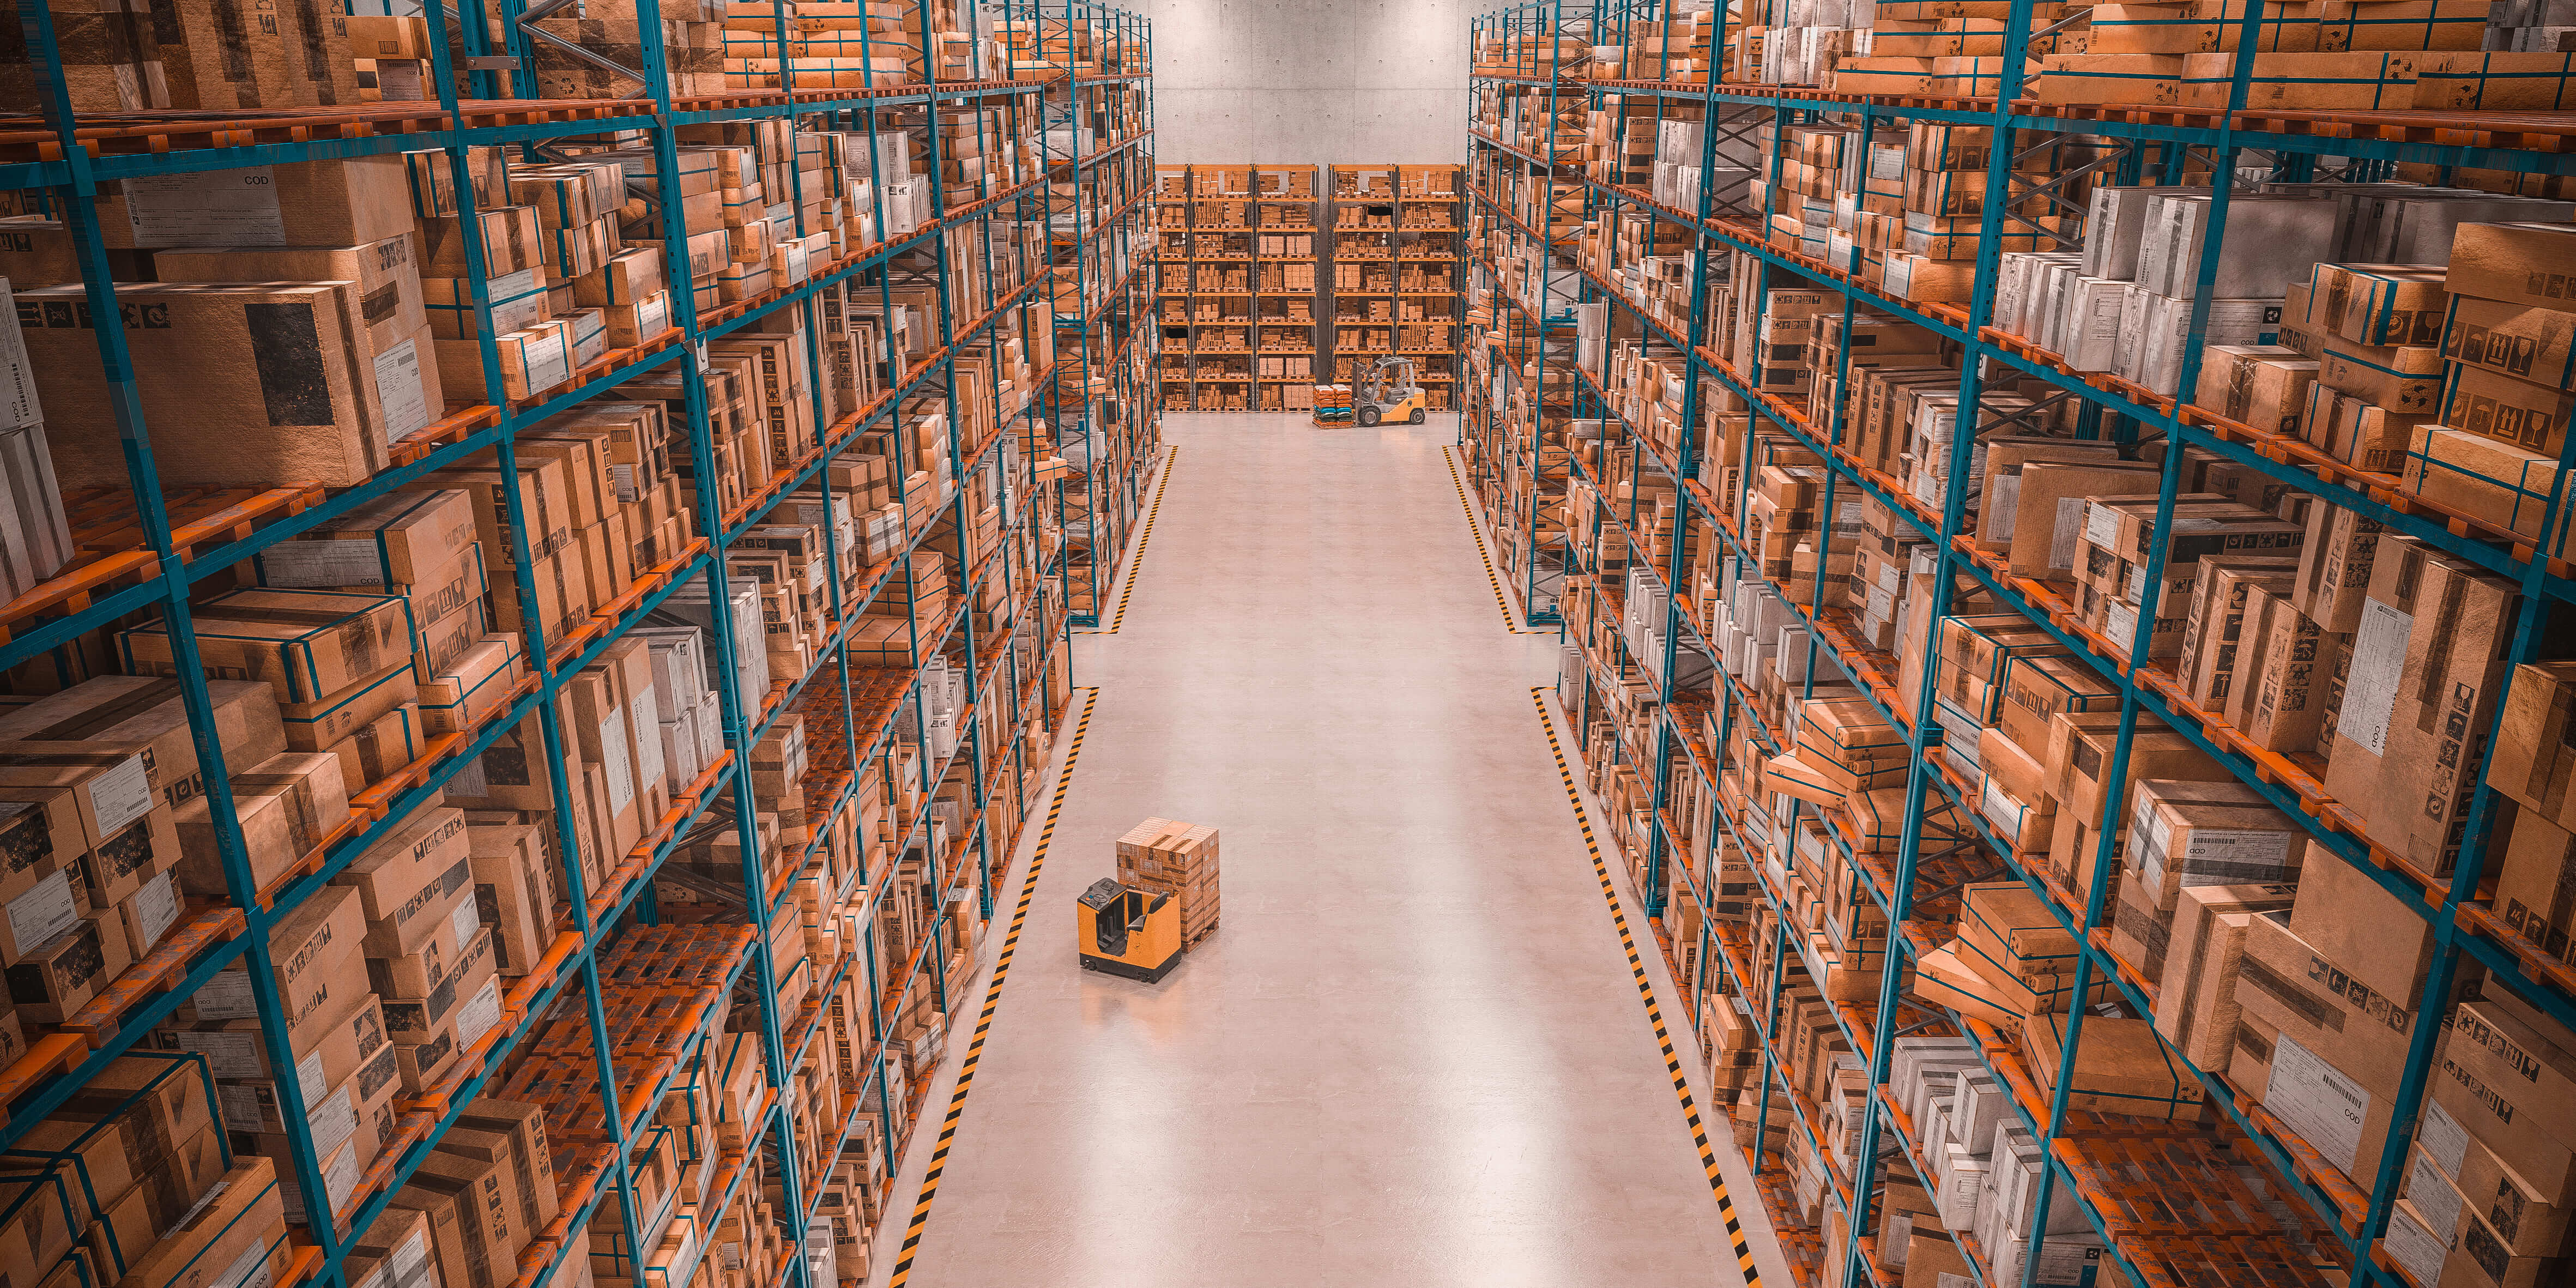 Indoor location for warehouse management